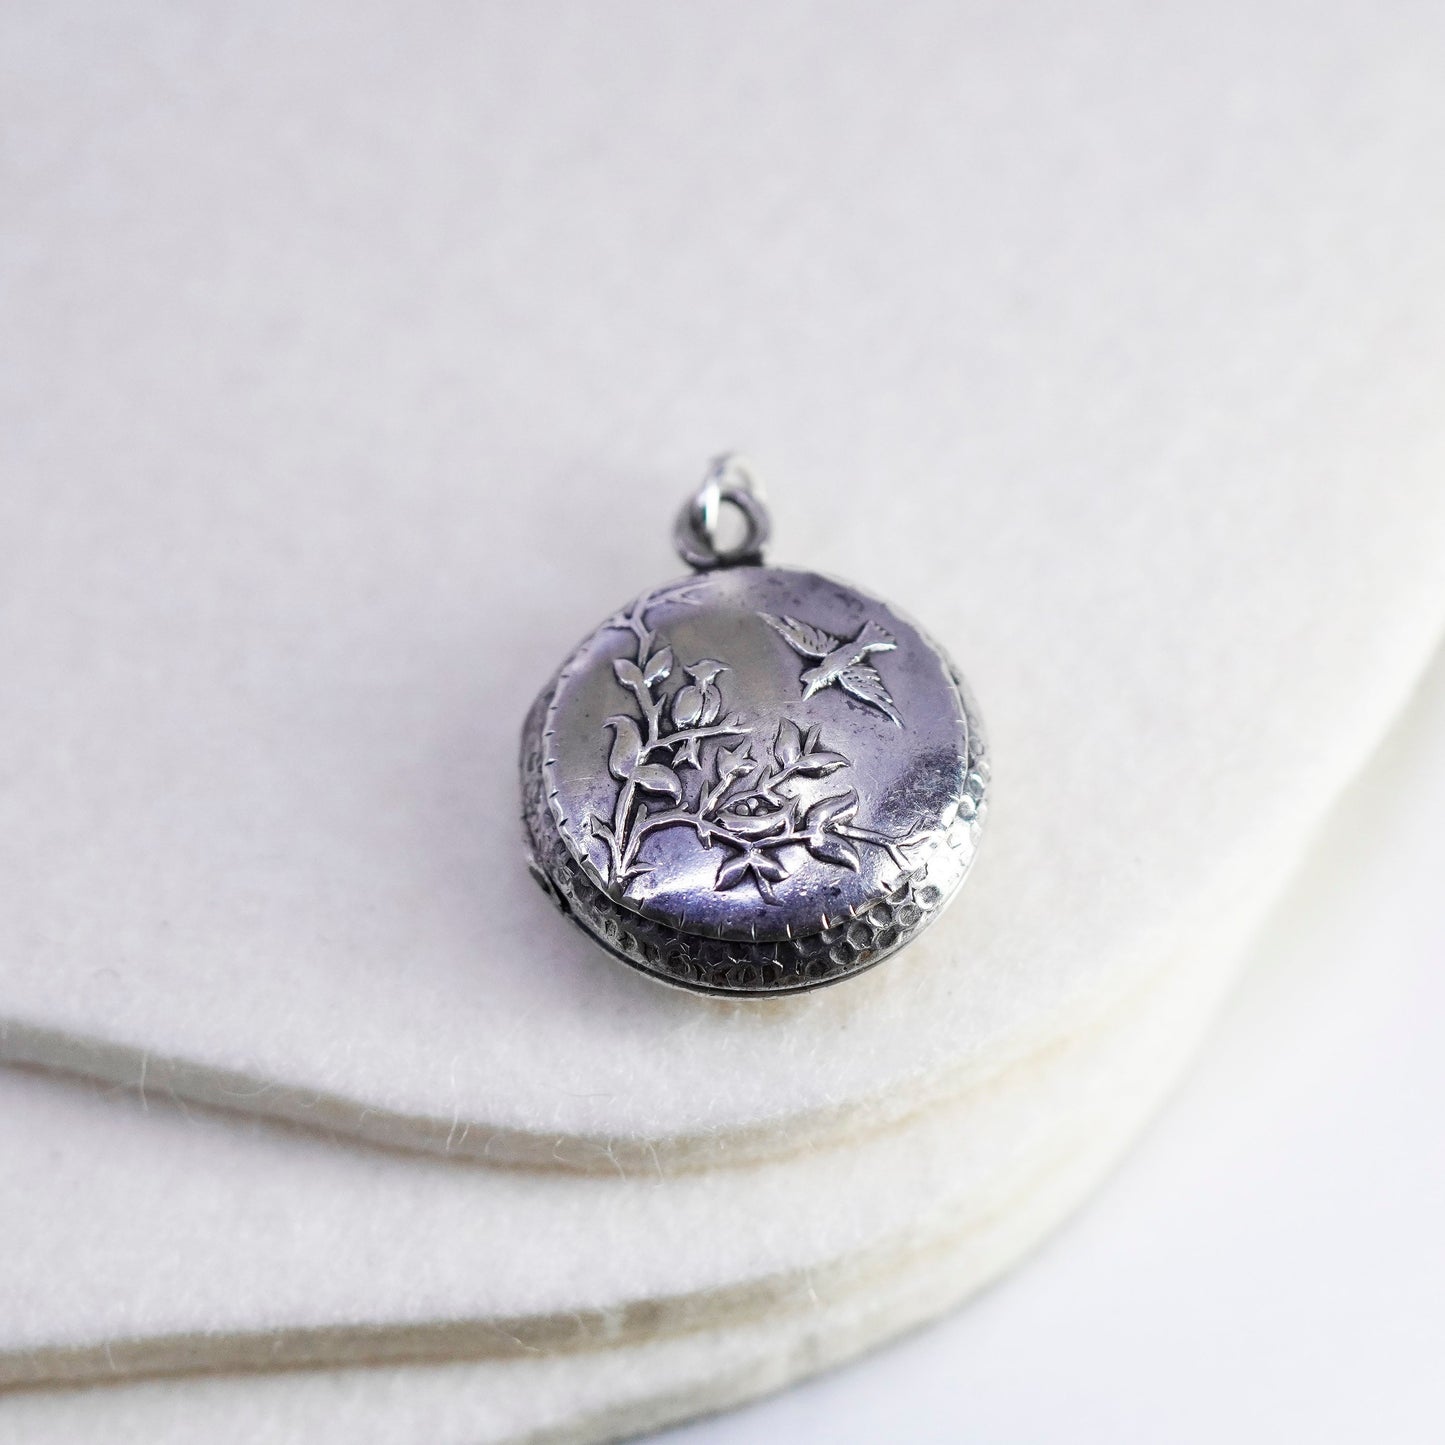 Antique Sterling silver charm, 925 circle photos locket with bird floral relief